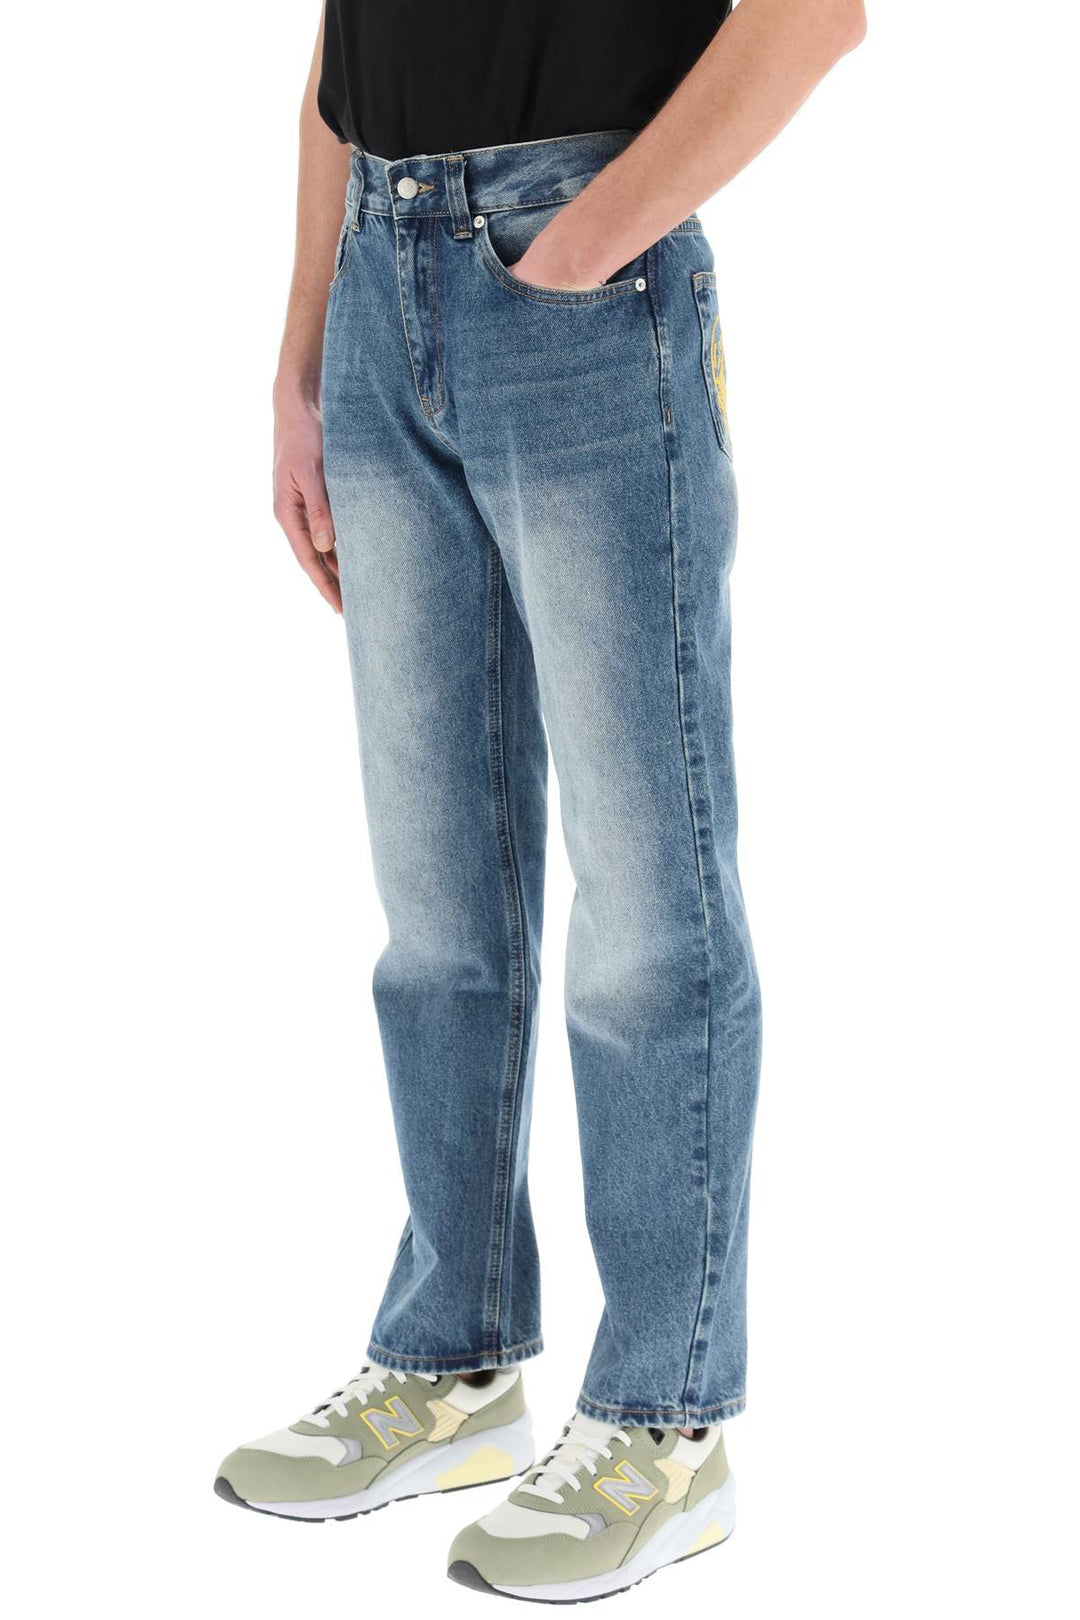 Billionaire Boys Club Jeans With Embroidery Decorations   Blu